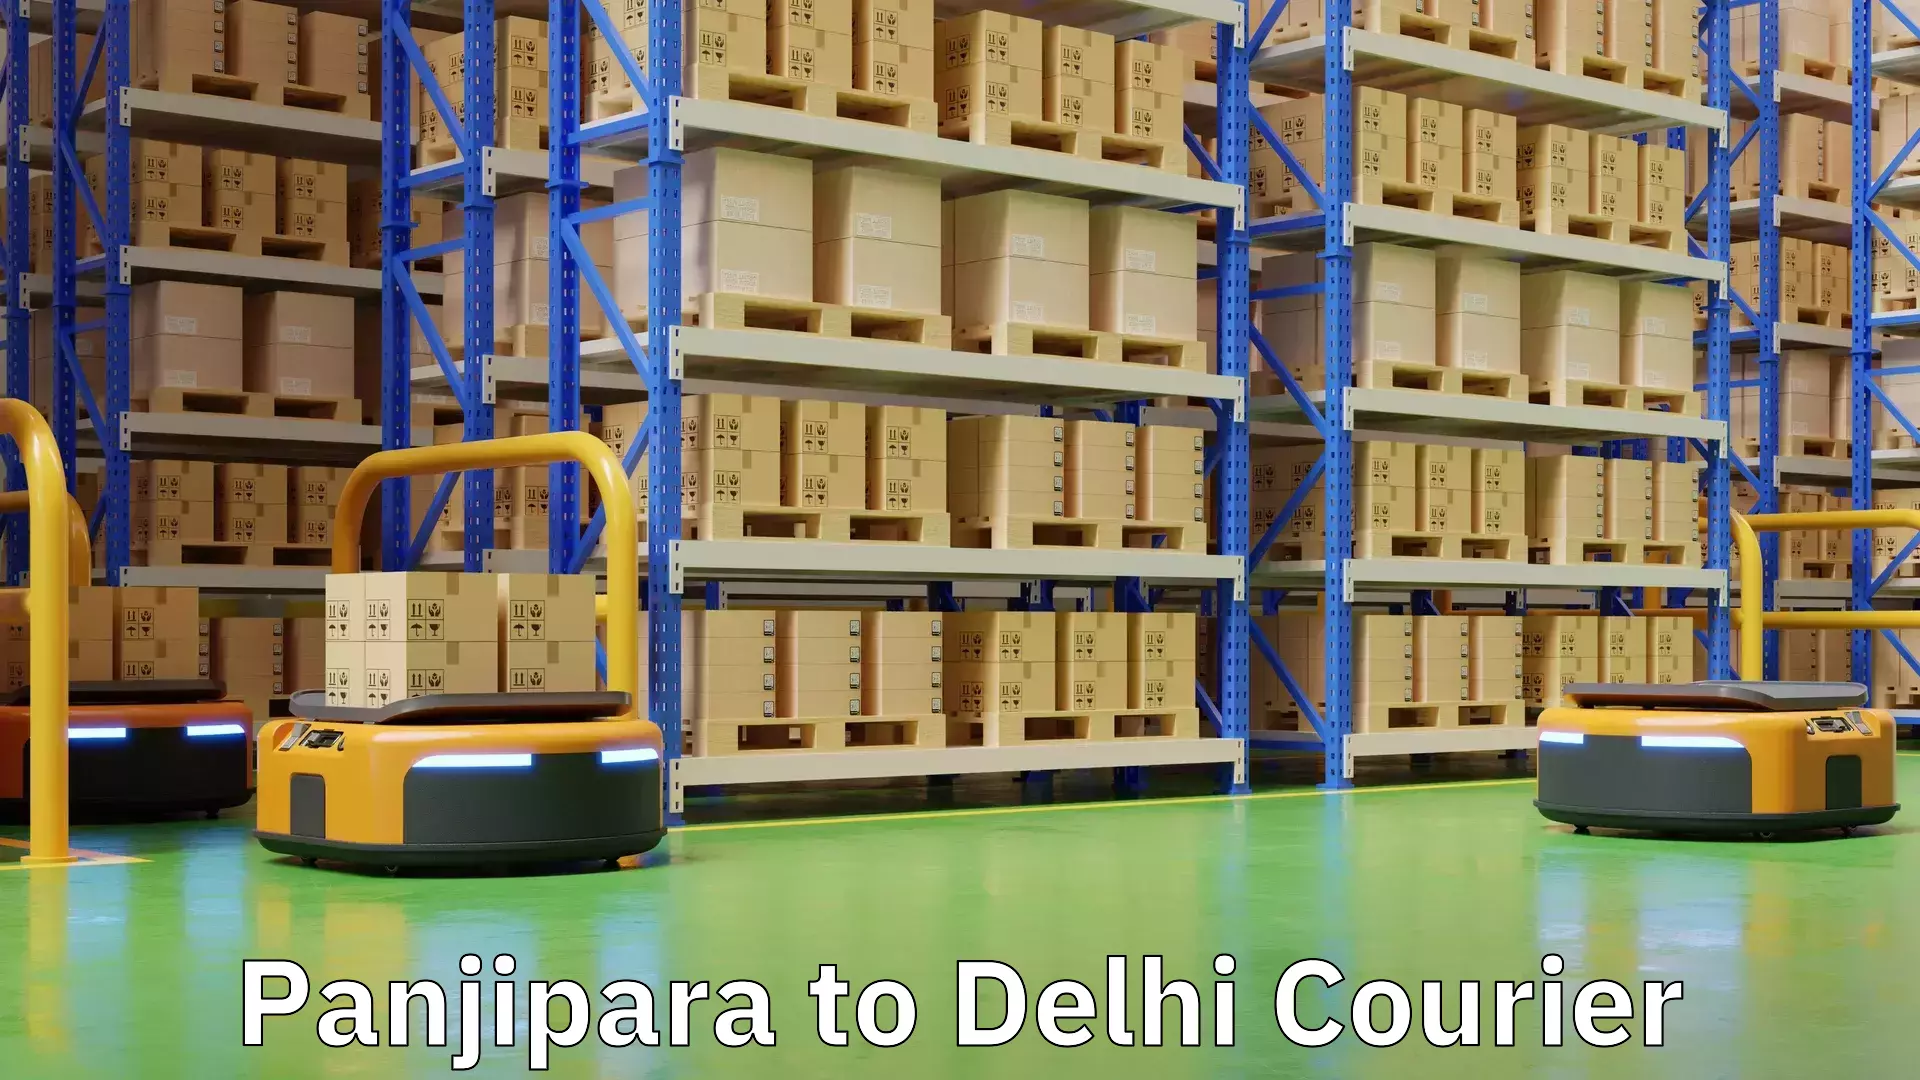 Flexible delivery schedules Panjipara to Delhi